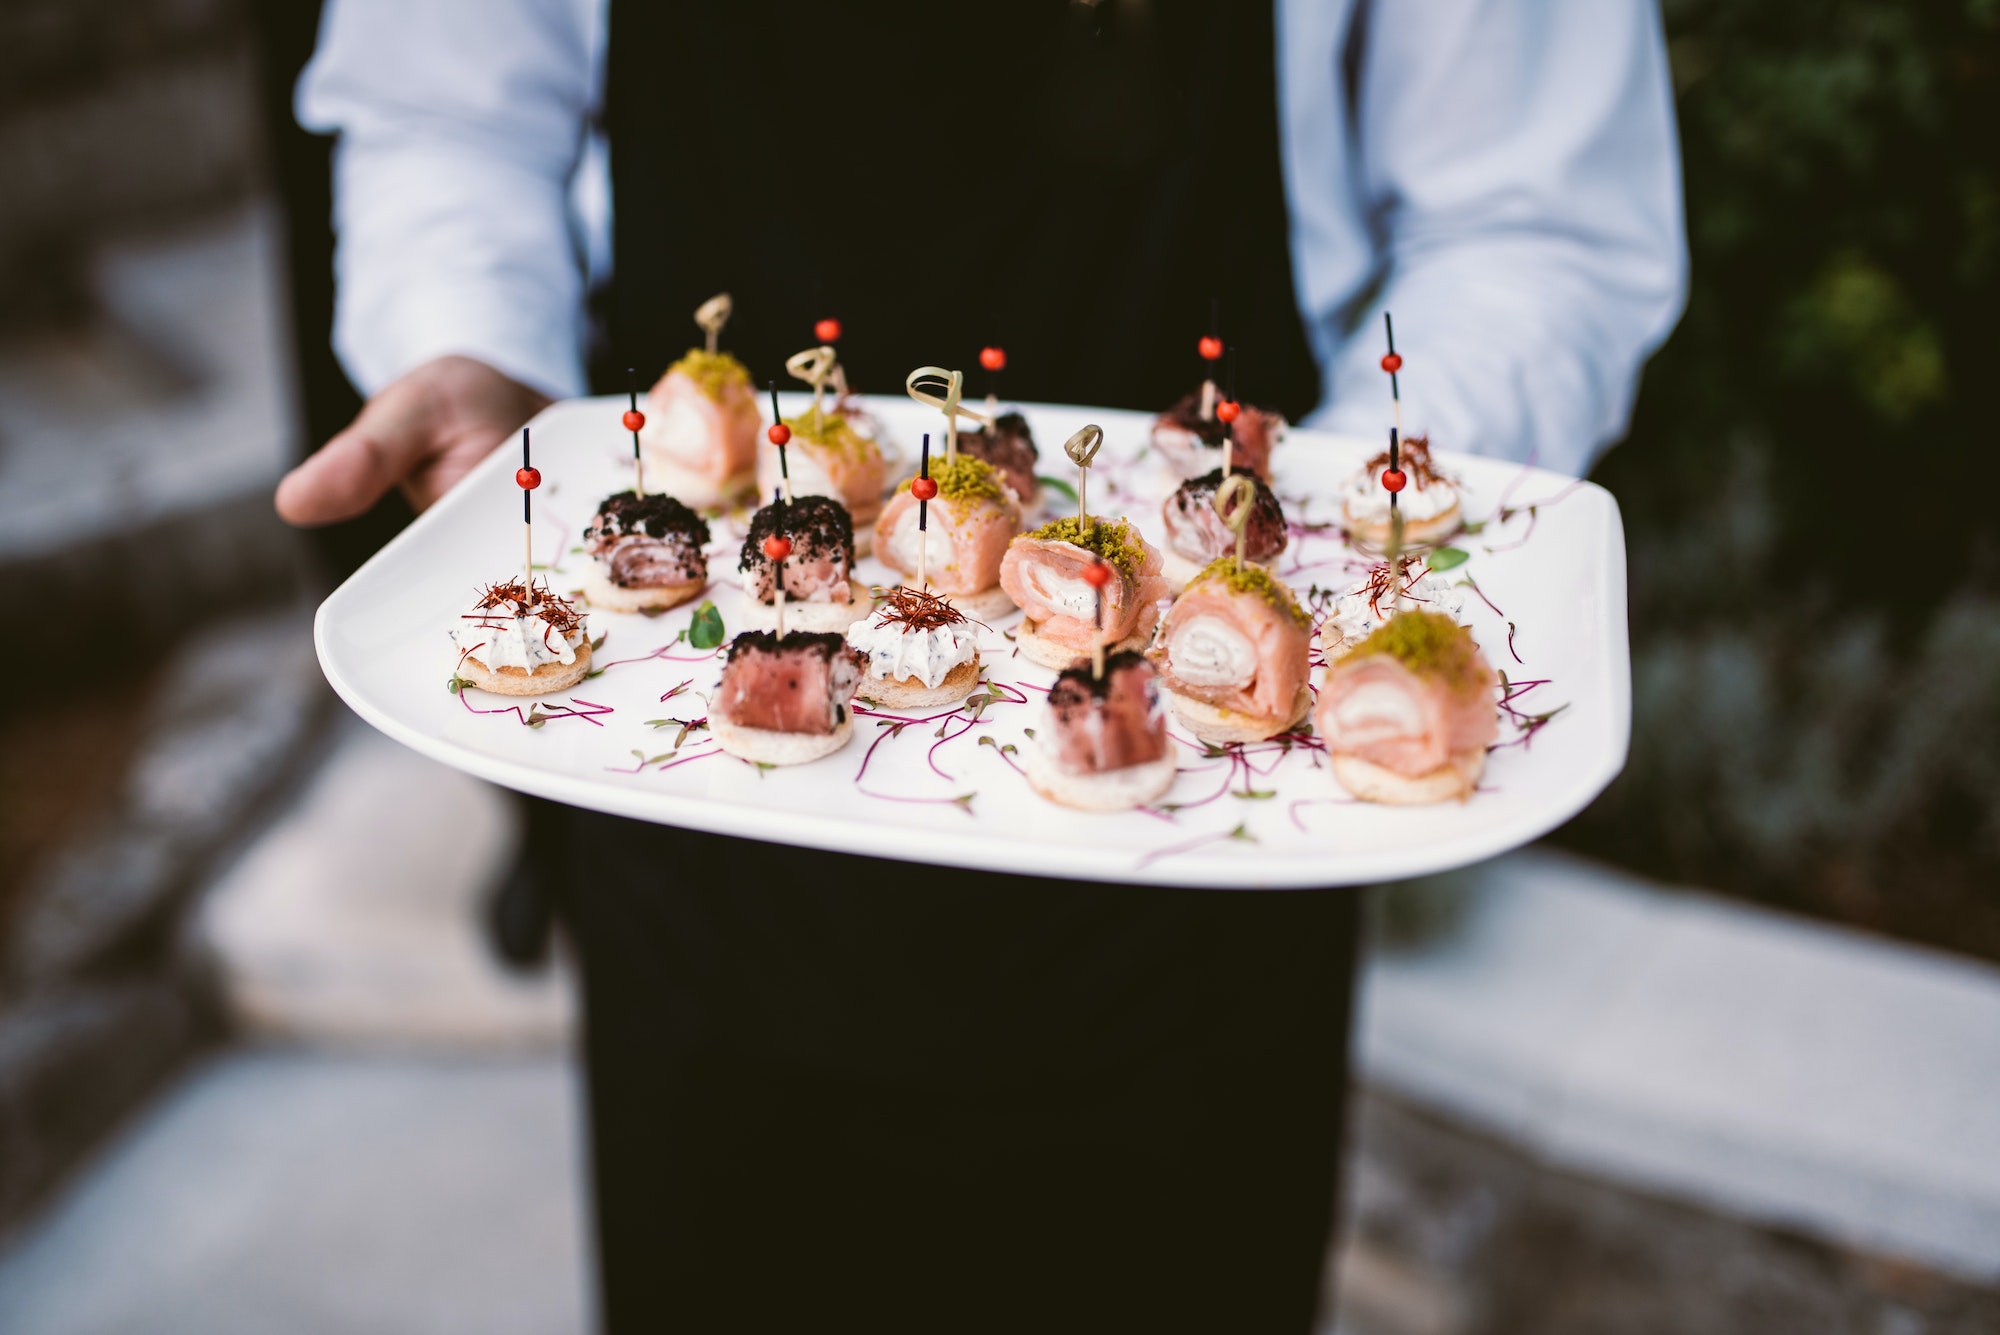 Waiter holding plate with canapés